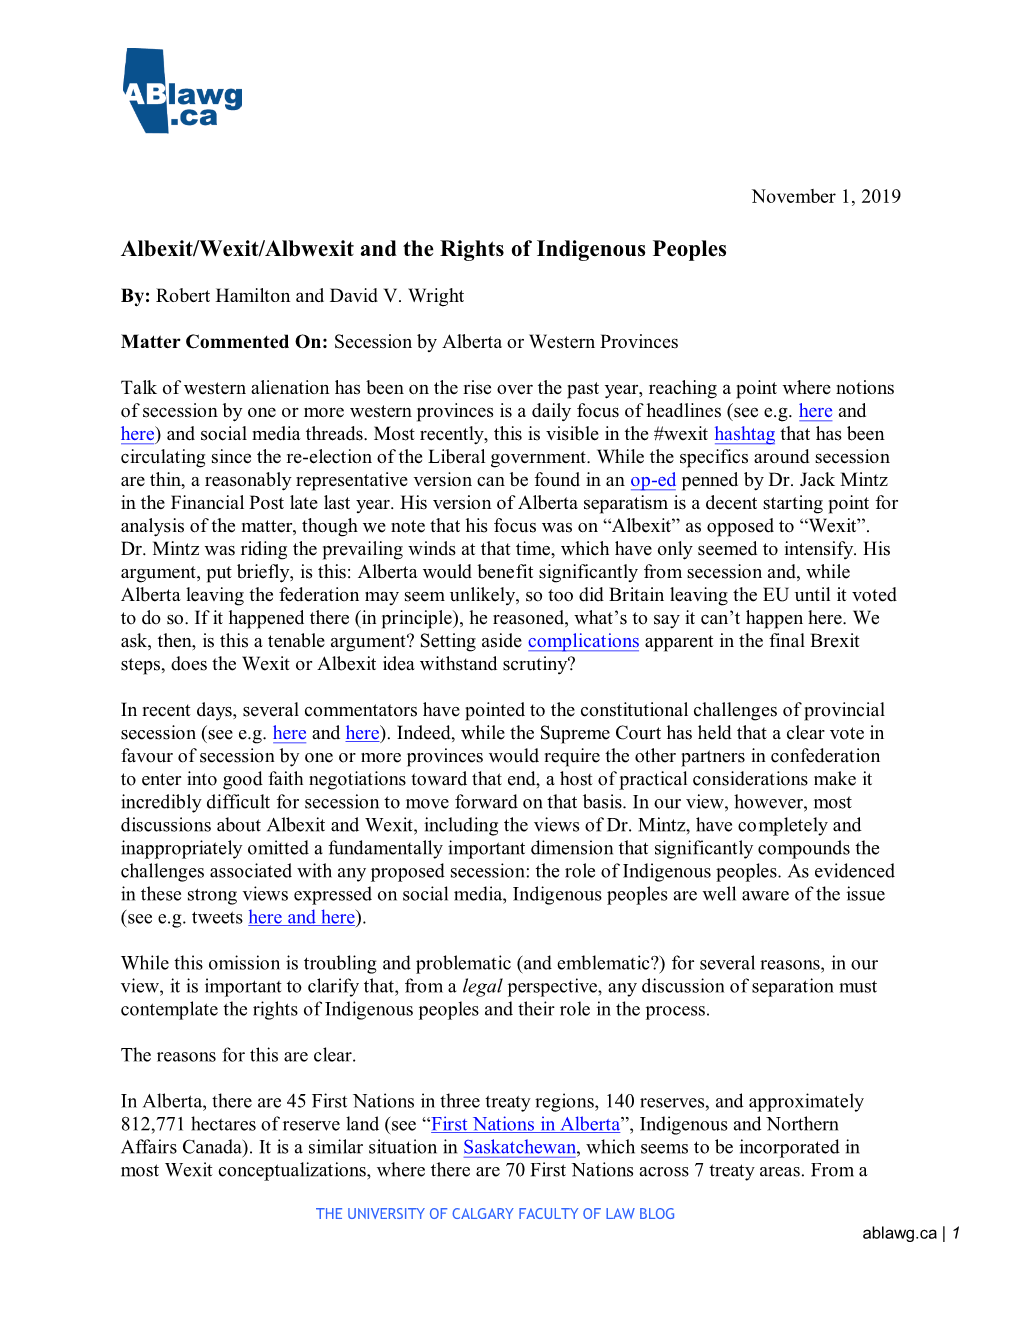 Albexit/Wexit/Albwexit and the Rights of Indigenous Peoples